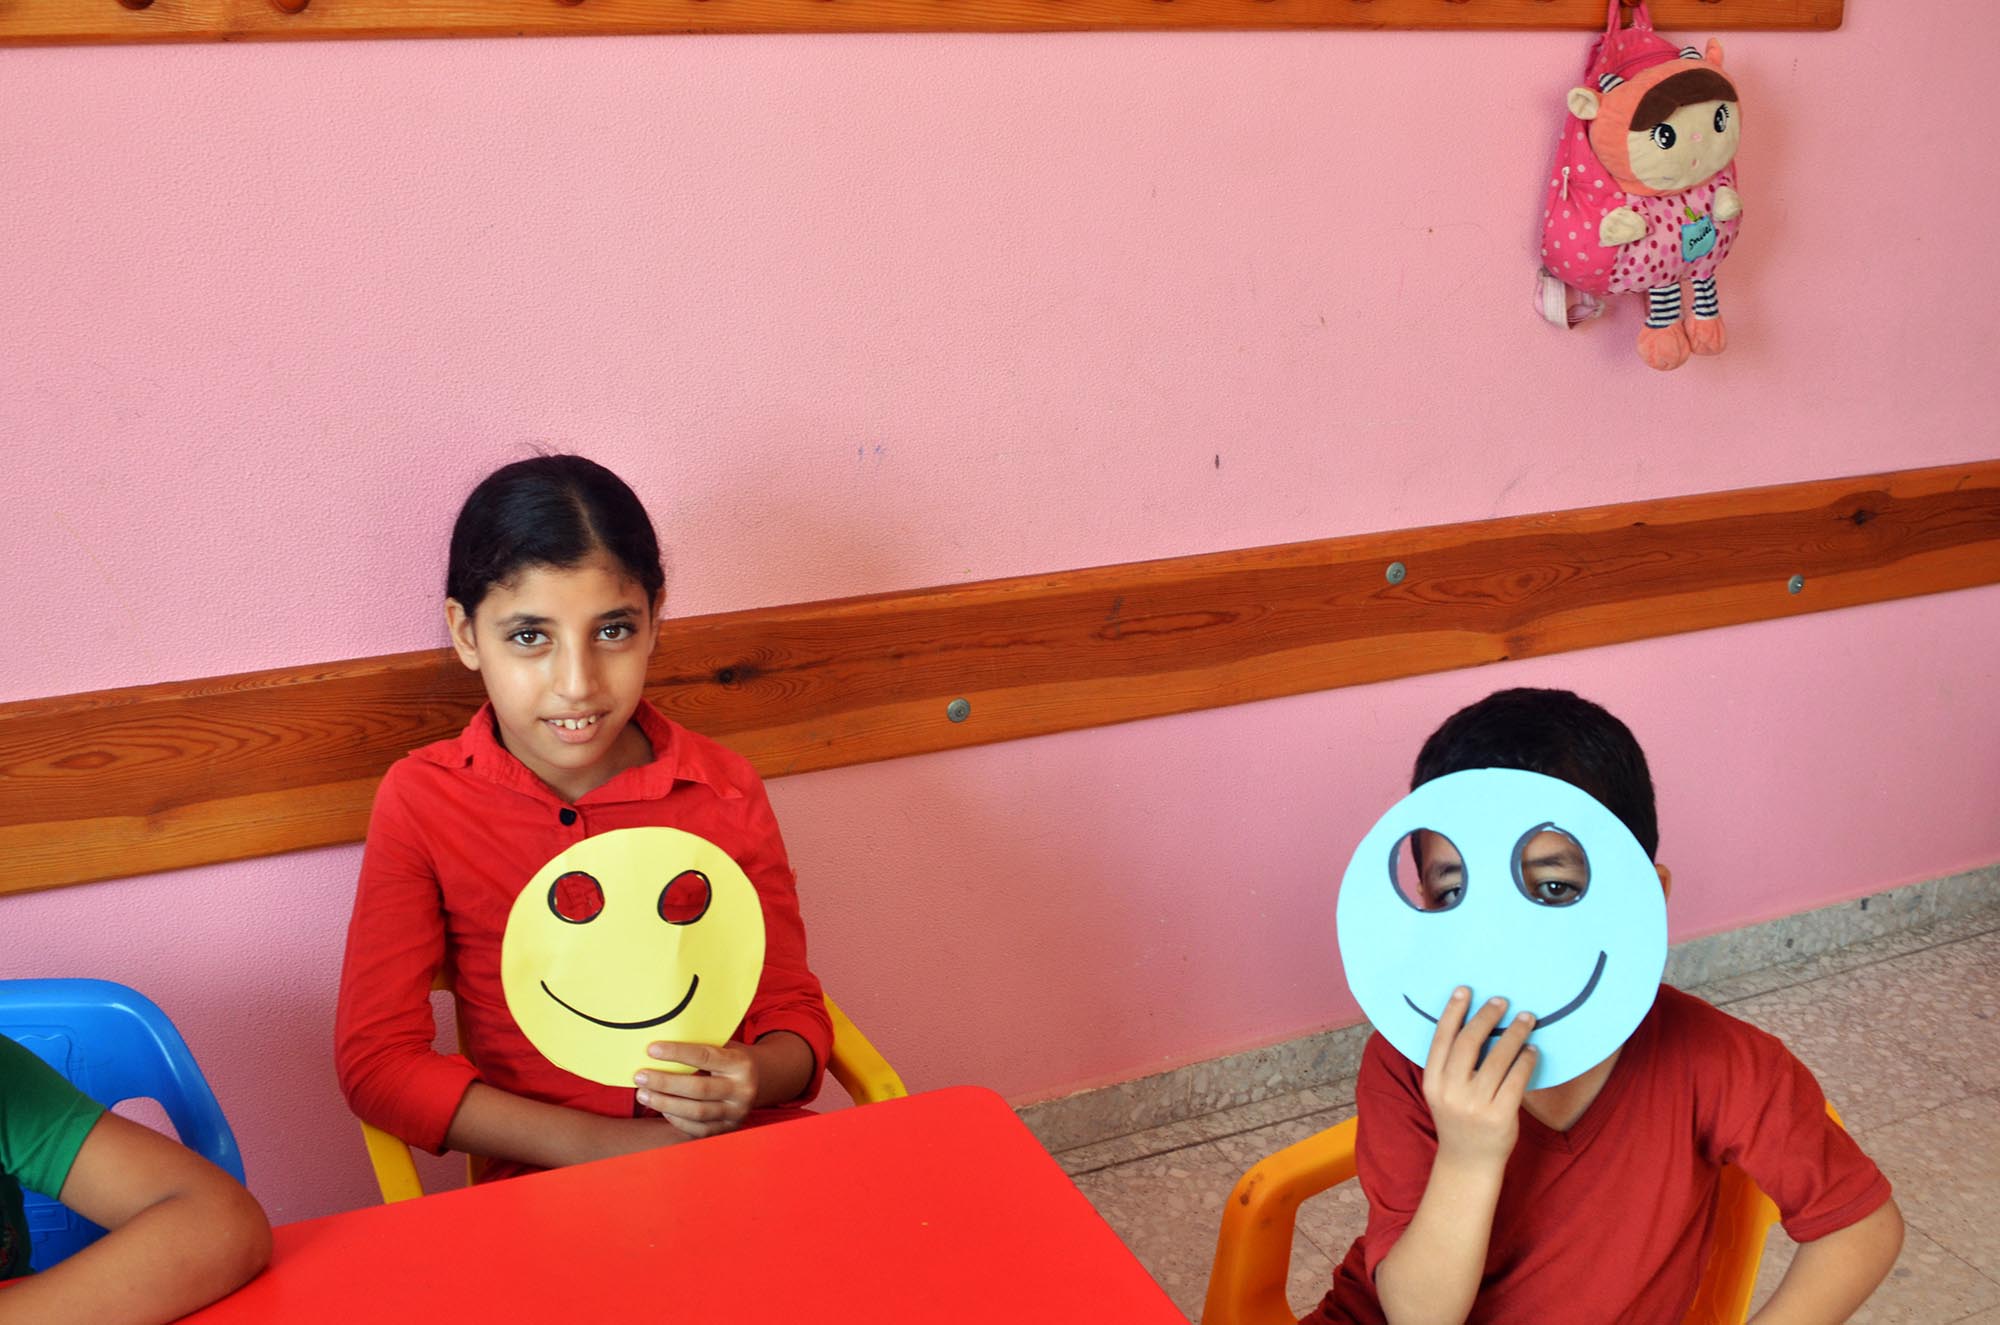 Kids are engaged in cut and paste activities to make masks featuring different 'emotions'.